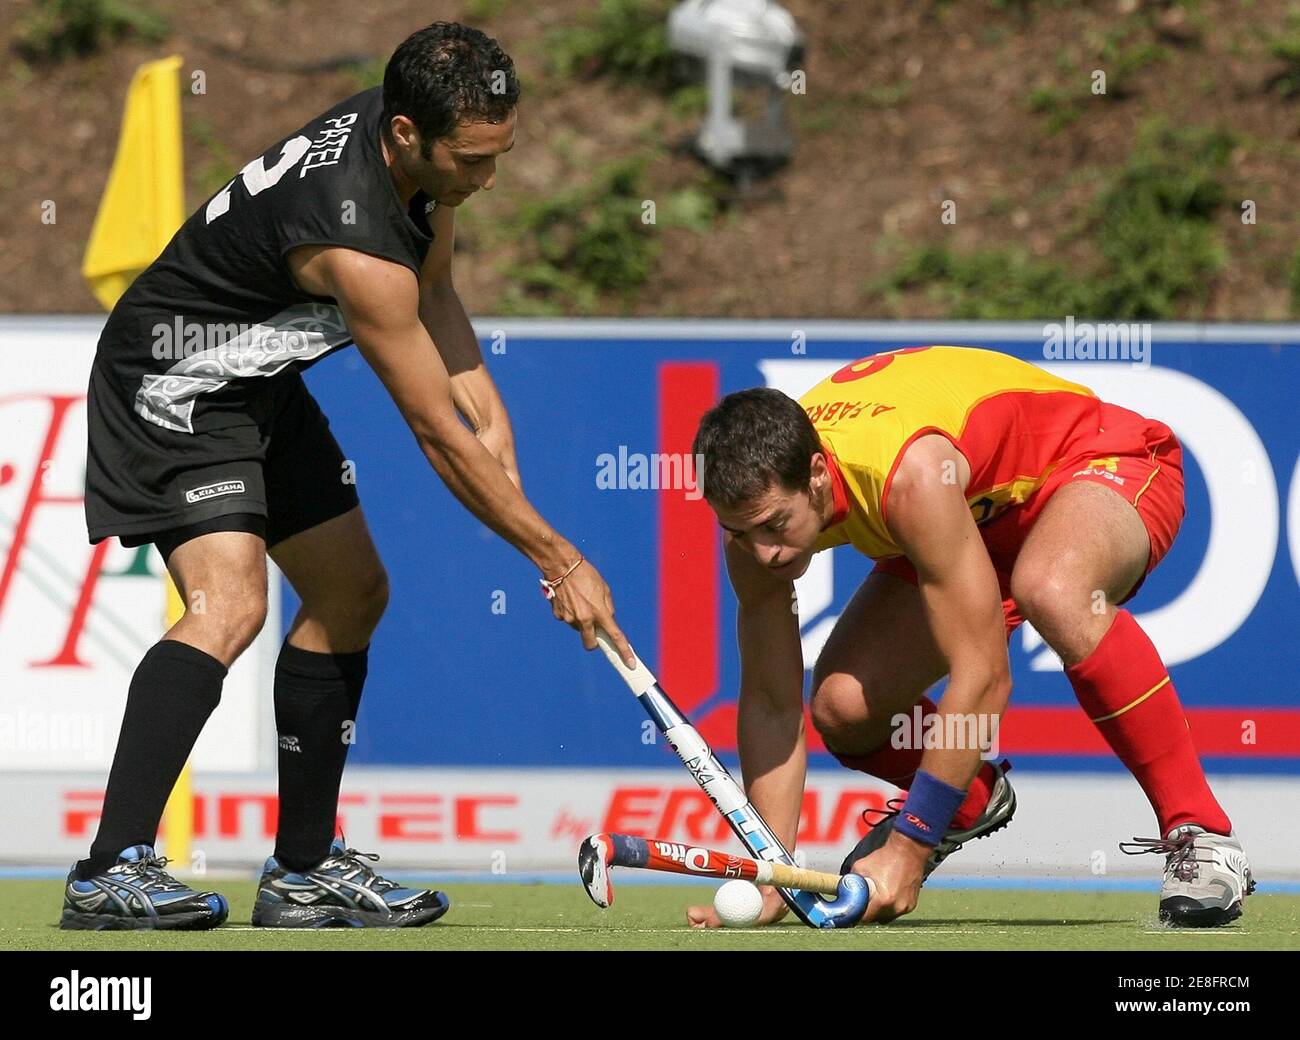 Spain's Alex Fabergas (R) fights for the ball with New Zealand's Mitesh Patel during their Men's Field Hockey World Cup match at the Warsteiner Hockey Park stadium in Moenchengladbach September 11, 2006. REUTERS/Pascal Lauener  (GERMANY) Stock Photo